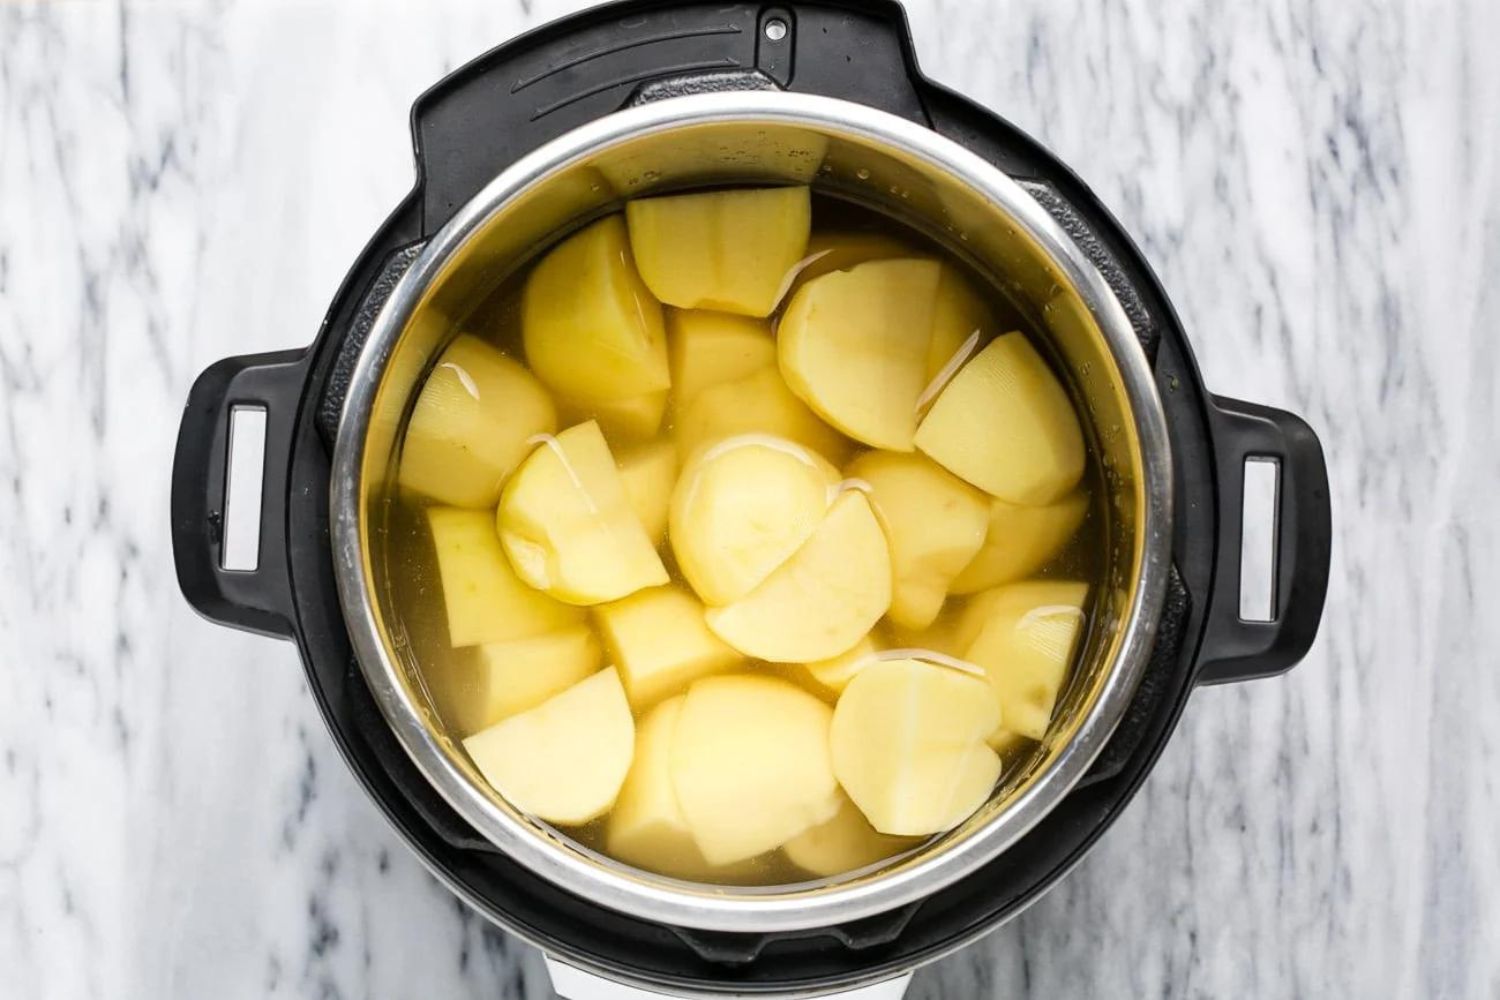 How Long Do Potatoes Boil In An Electric Pressure Cooker